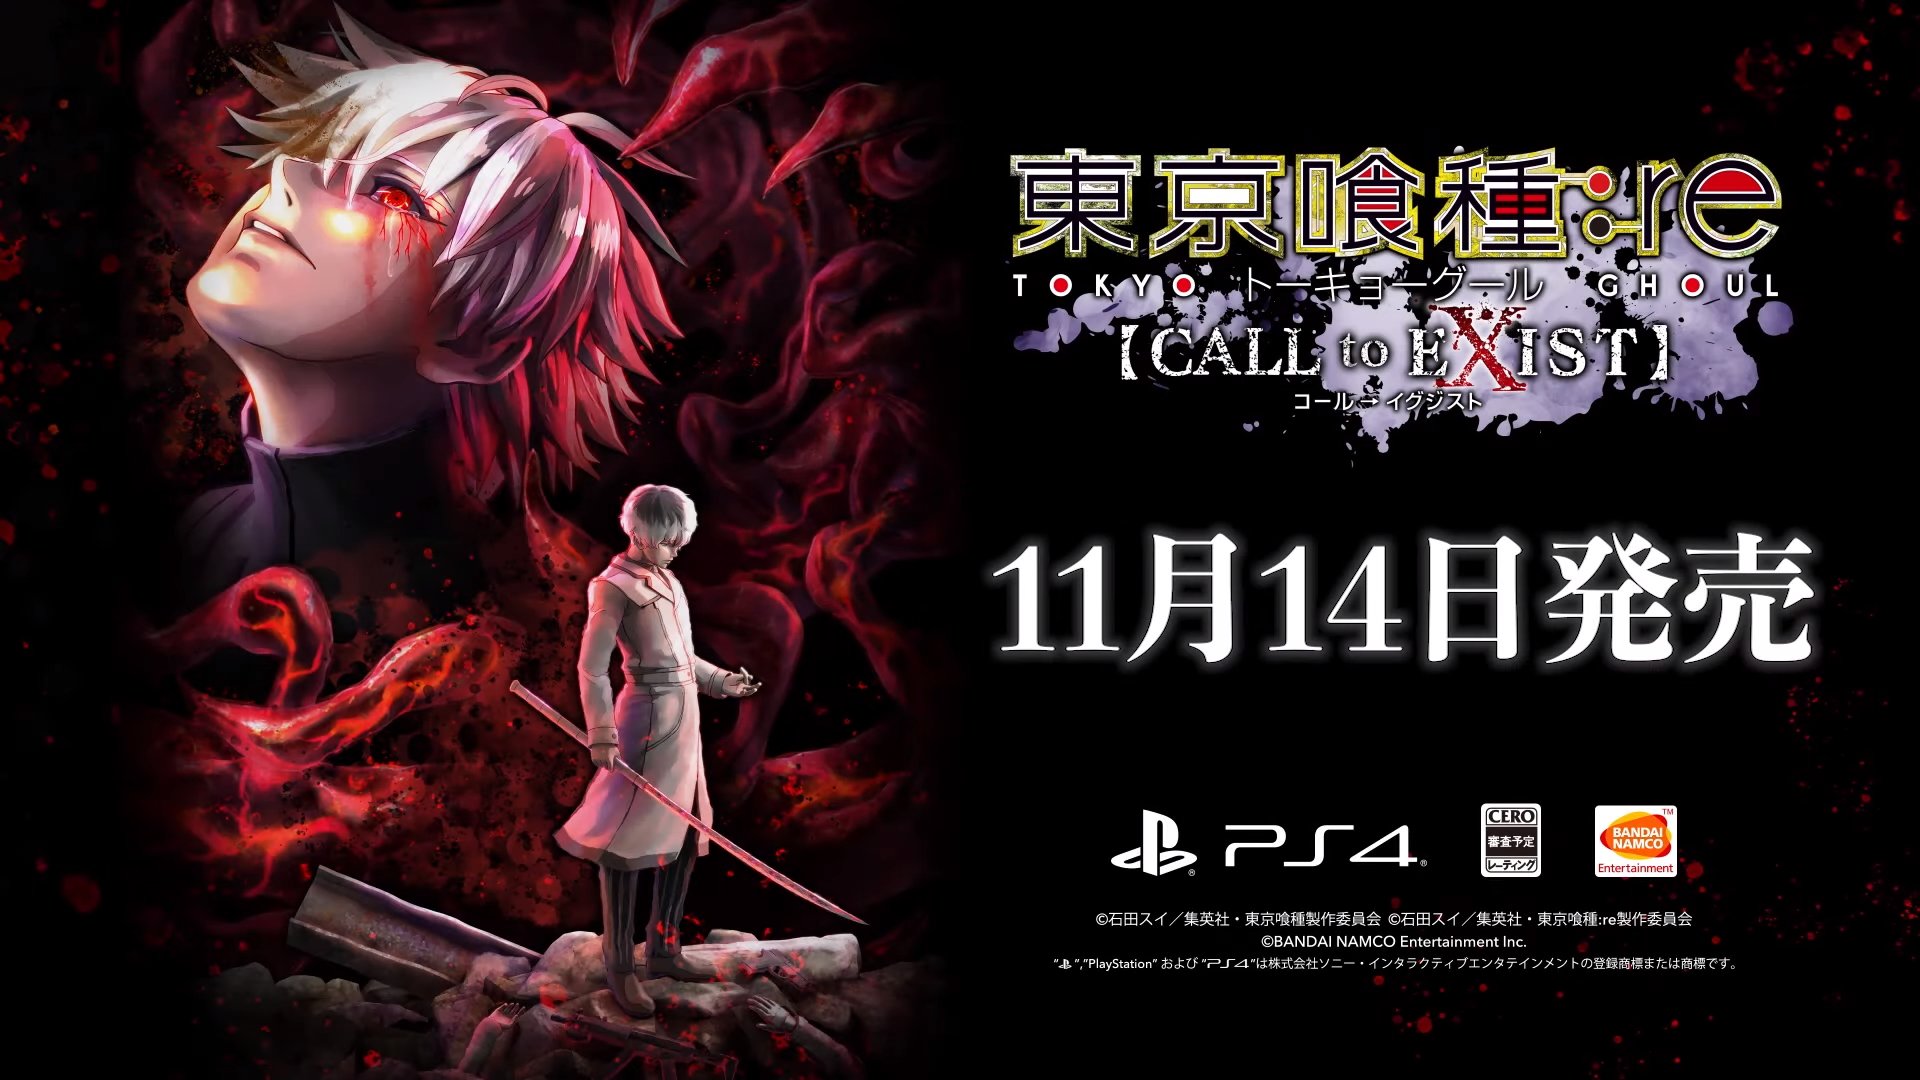 Ps4 東京喰種トーキョーグール Re Call To Exist 11月14日発売